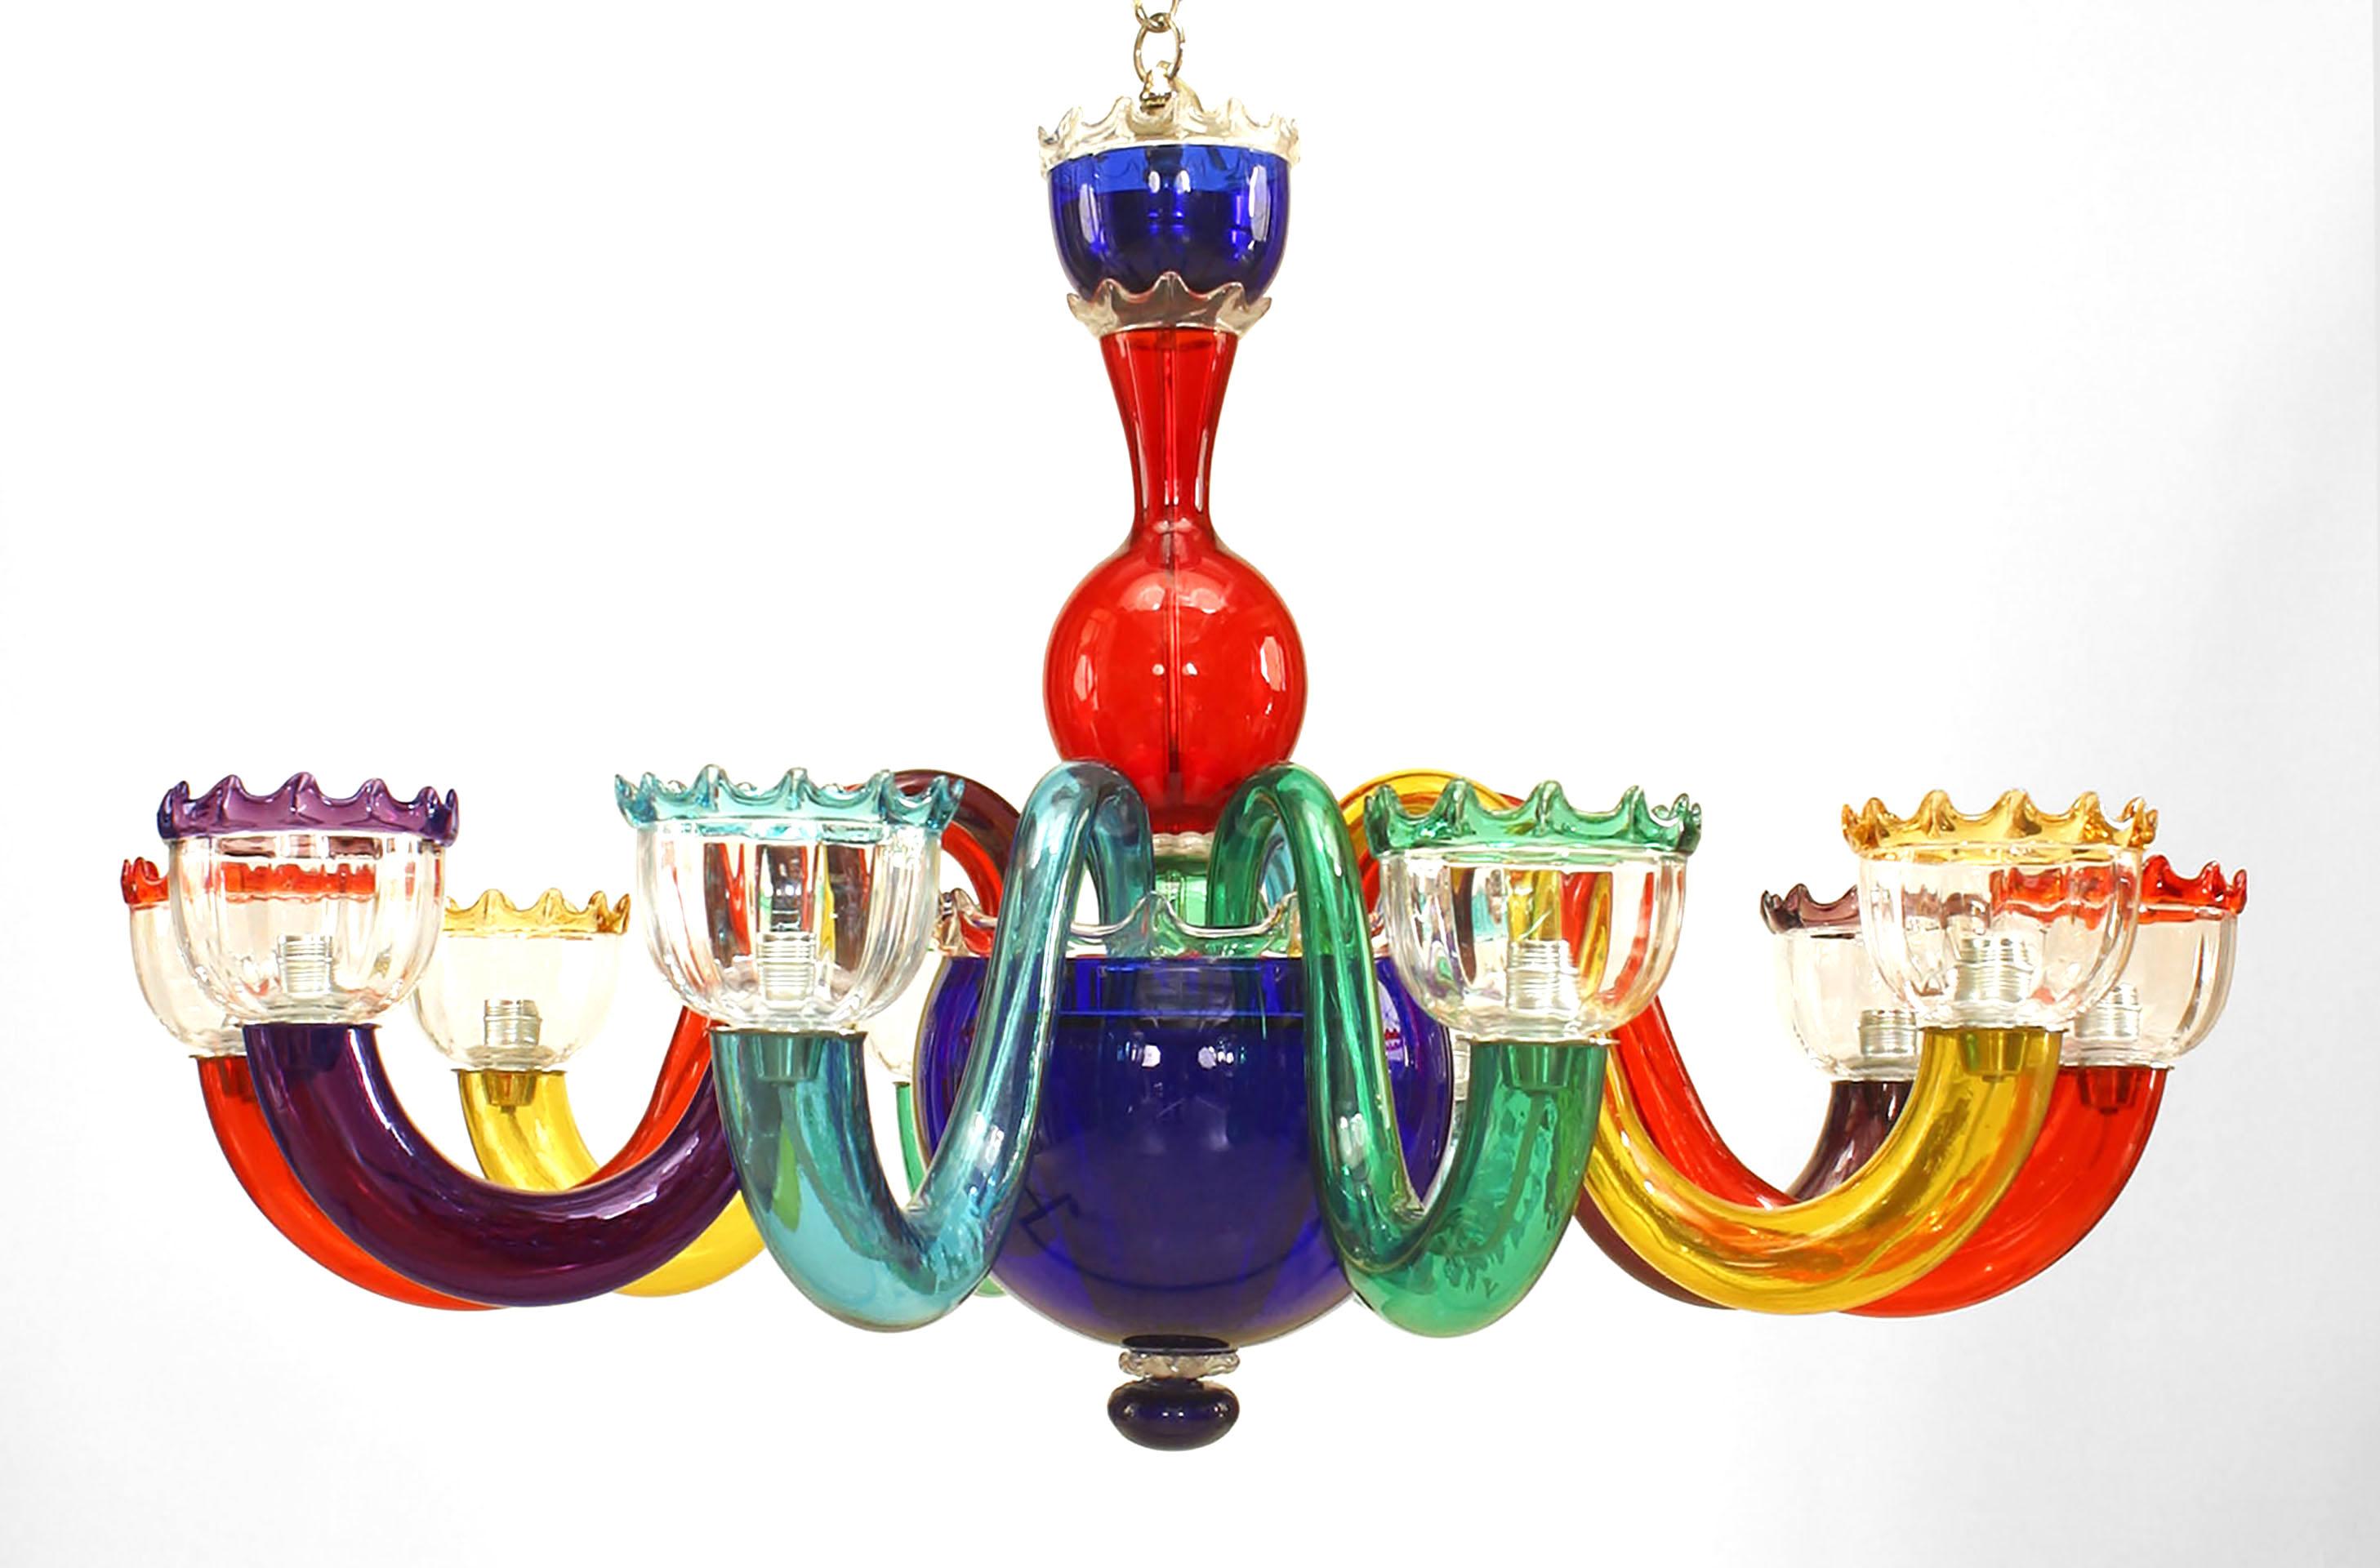 Italian (1950s) multicolored Murano glass chandelier with 10 scroll form arms and clear shades with colored scalloped edge (Attributed to GIO PONTI)
